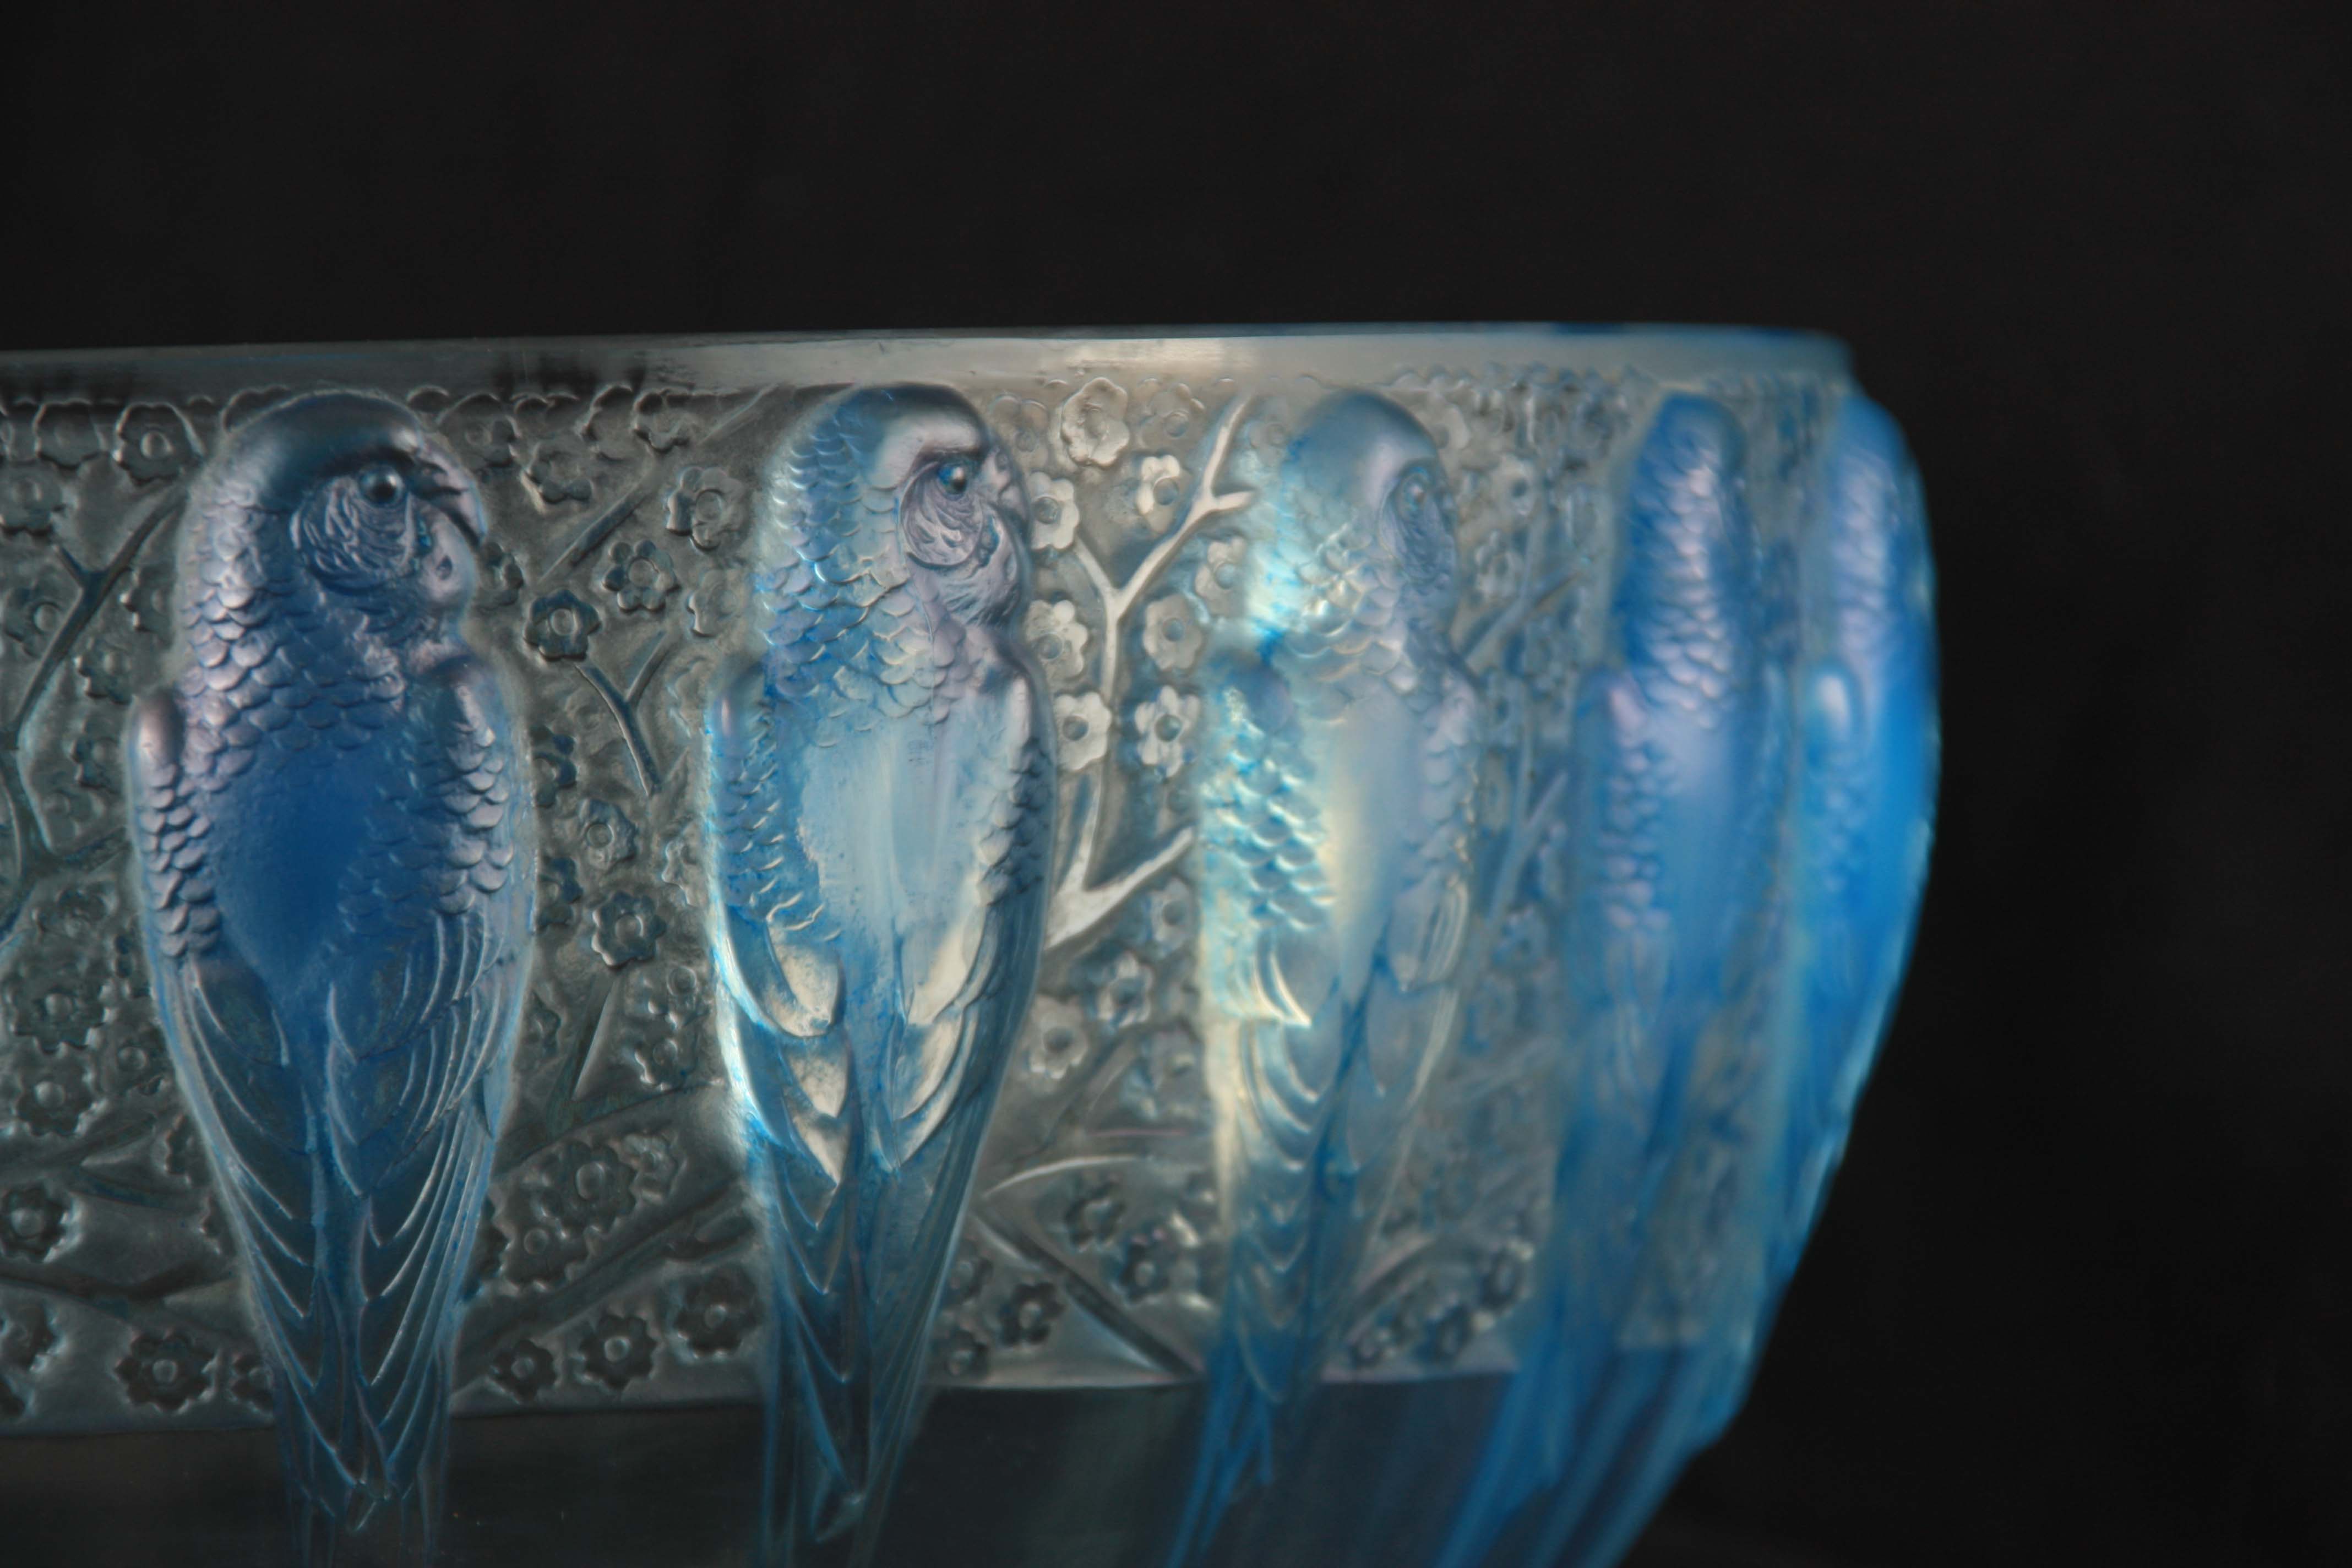 R. LALIQUE, FRANCE A 20TH CENTURY OPALESCENT PERRUCHE BOWL HIGHLIGHTED WITH BLUE STAINING - Image 3 of 5